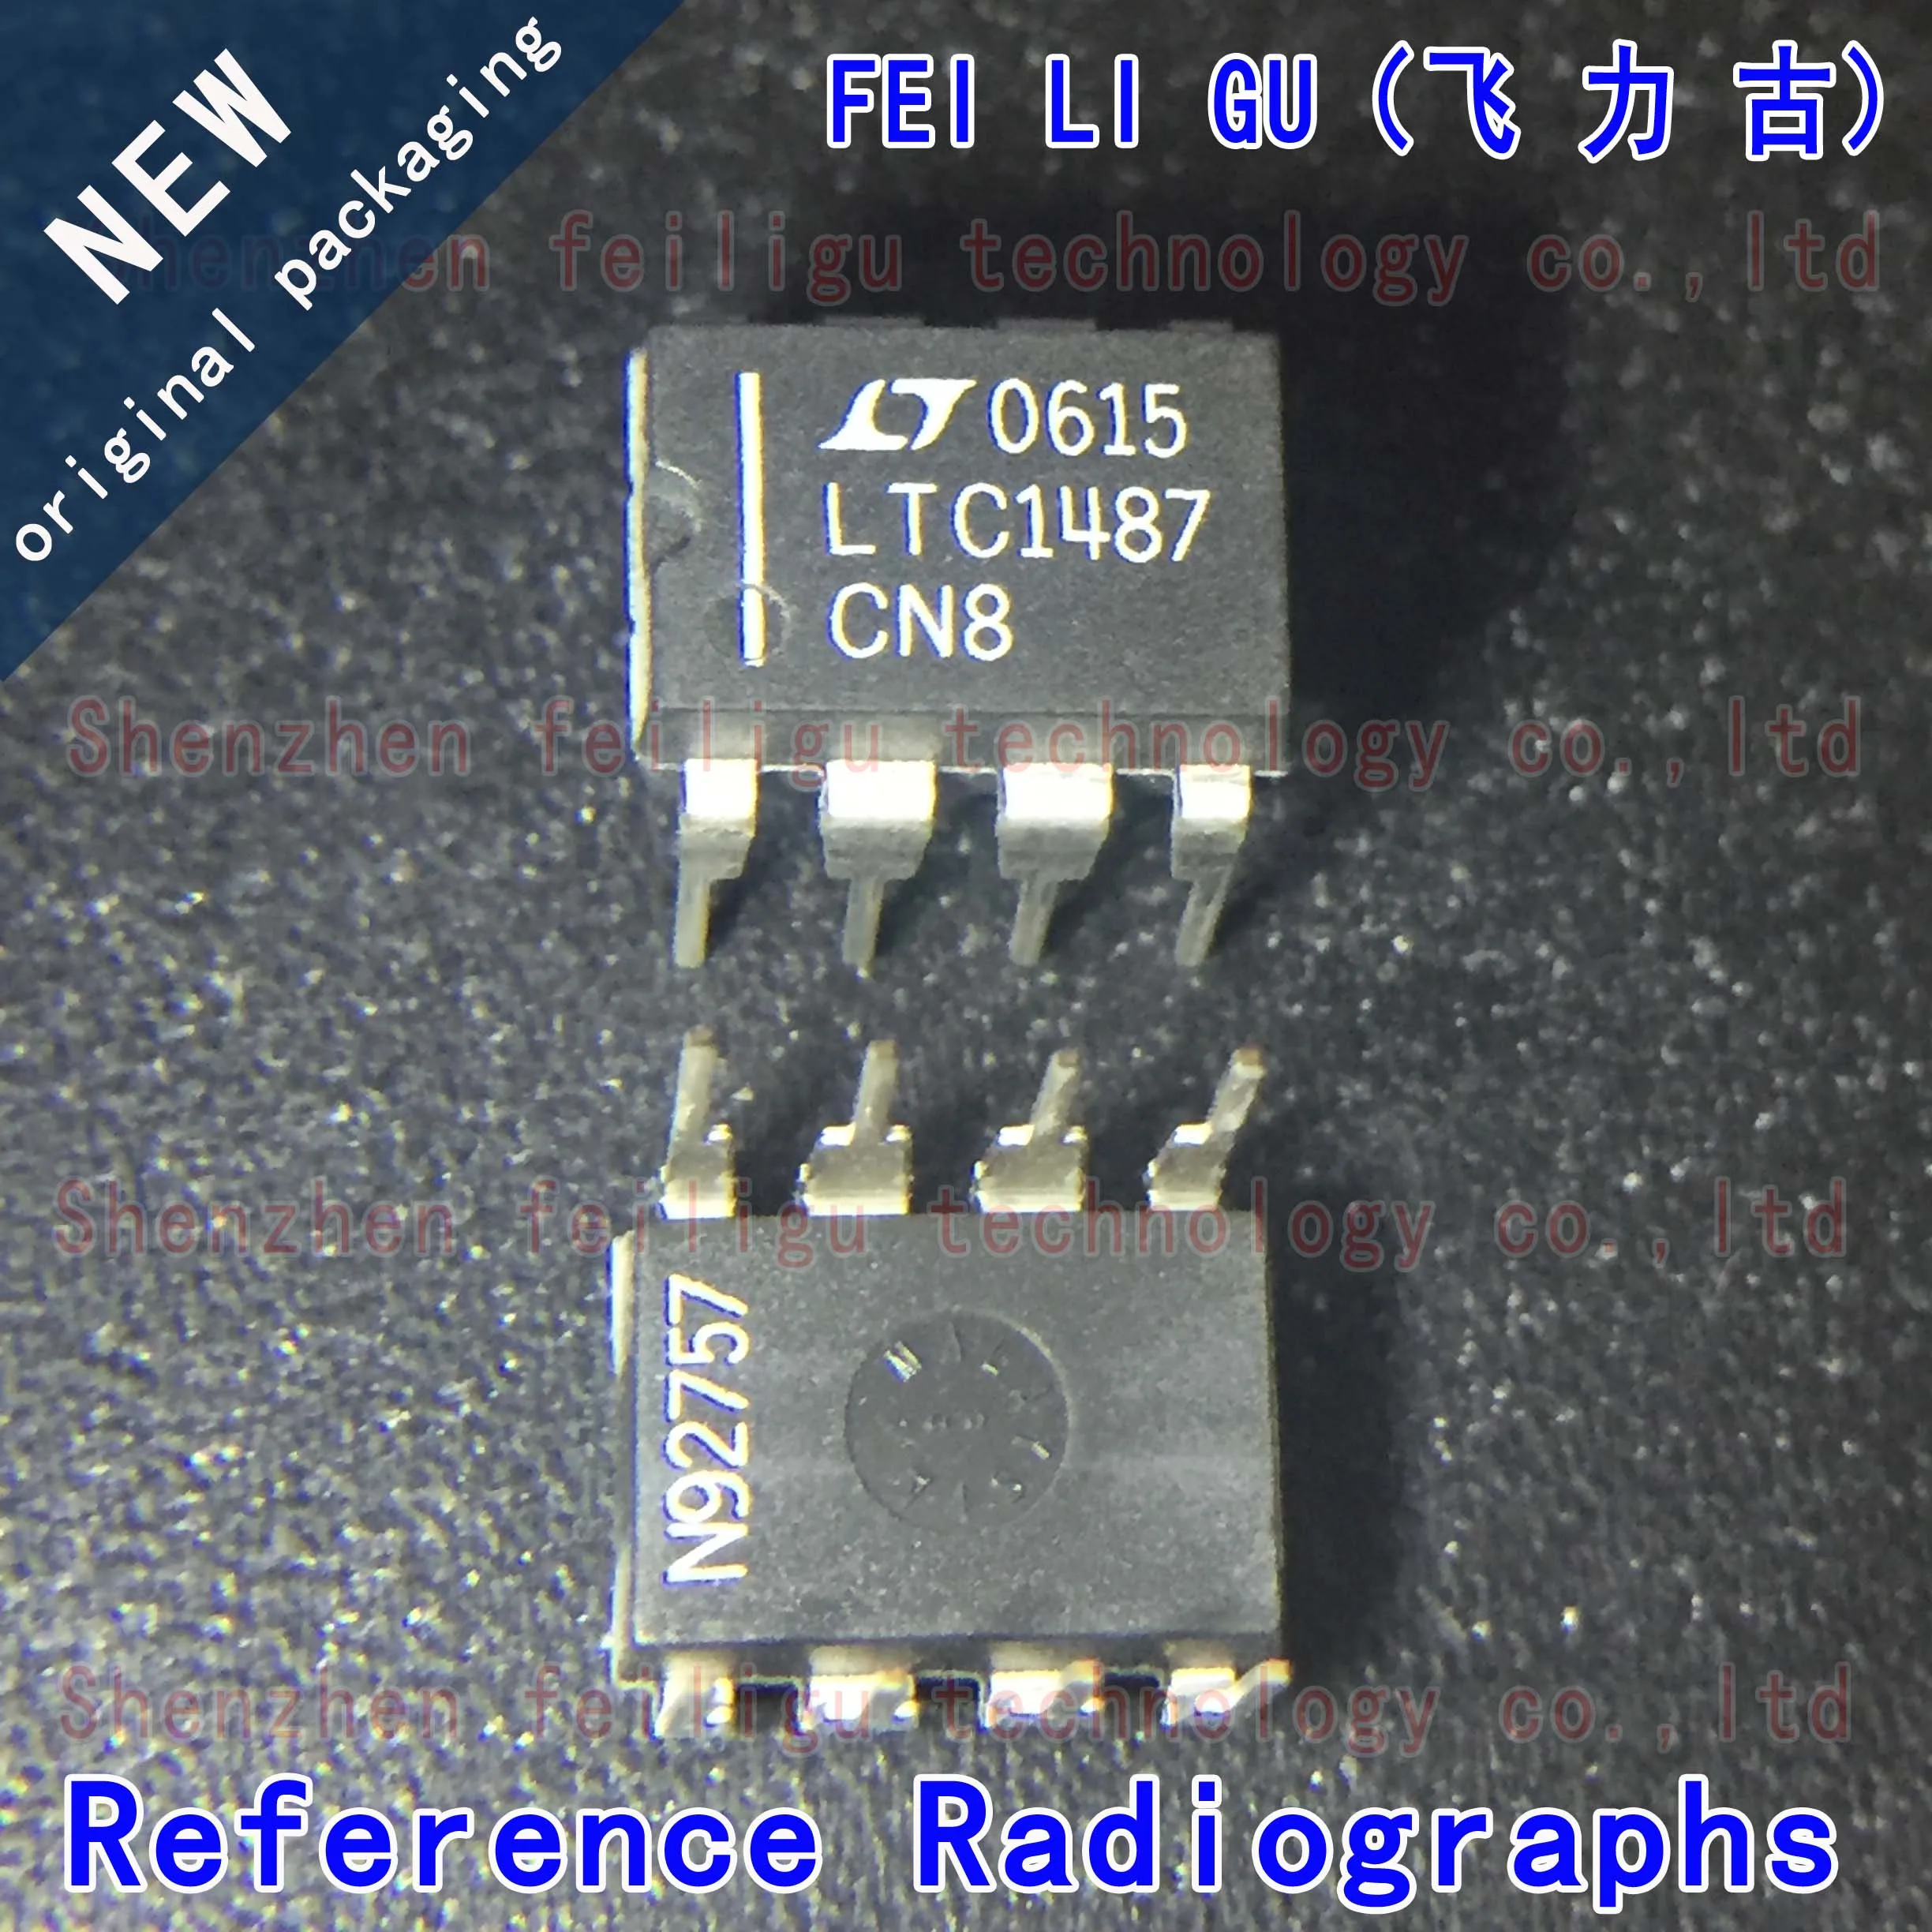 1pcs 100% new original lm231n nopb lm231n lm231 package dip8 inline precision voltage frequency converter chip 1~30PCS 100% New original LTC1487CN8#PBF LTC1487CN8 LTC1487 Package:DIP8 Inline RS-485/RS-422 Transceiver Chip